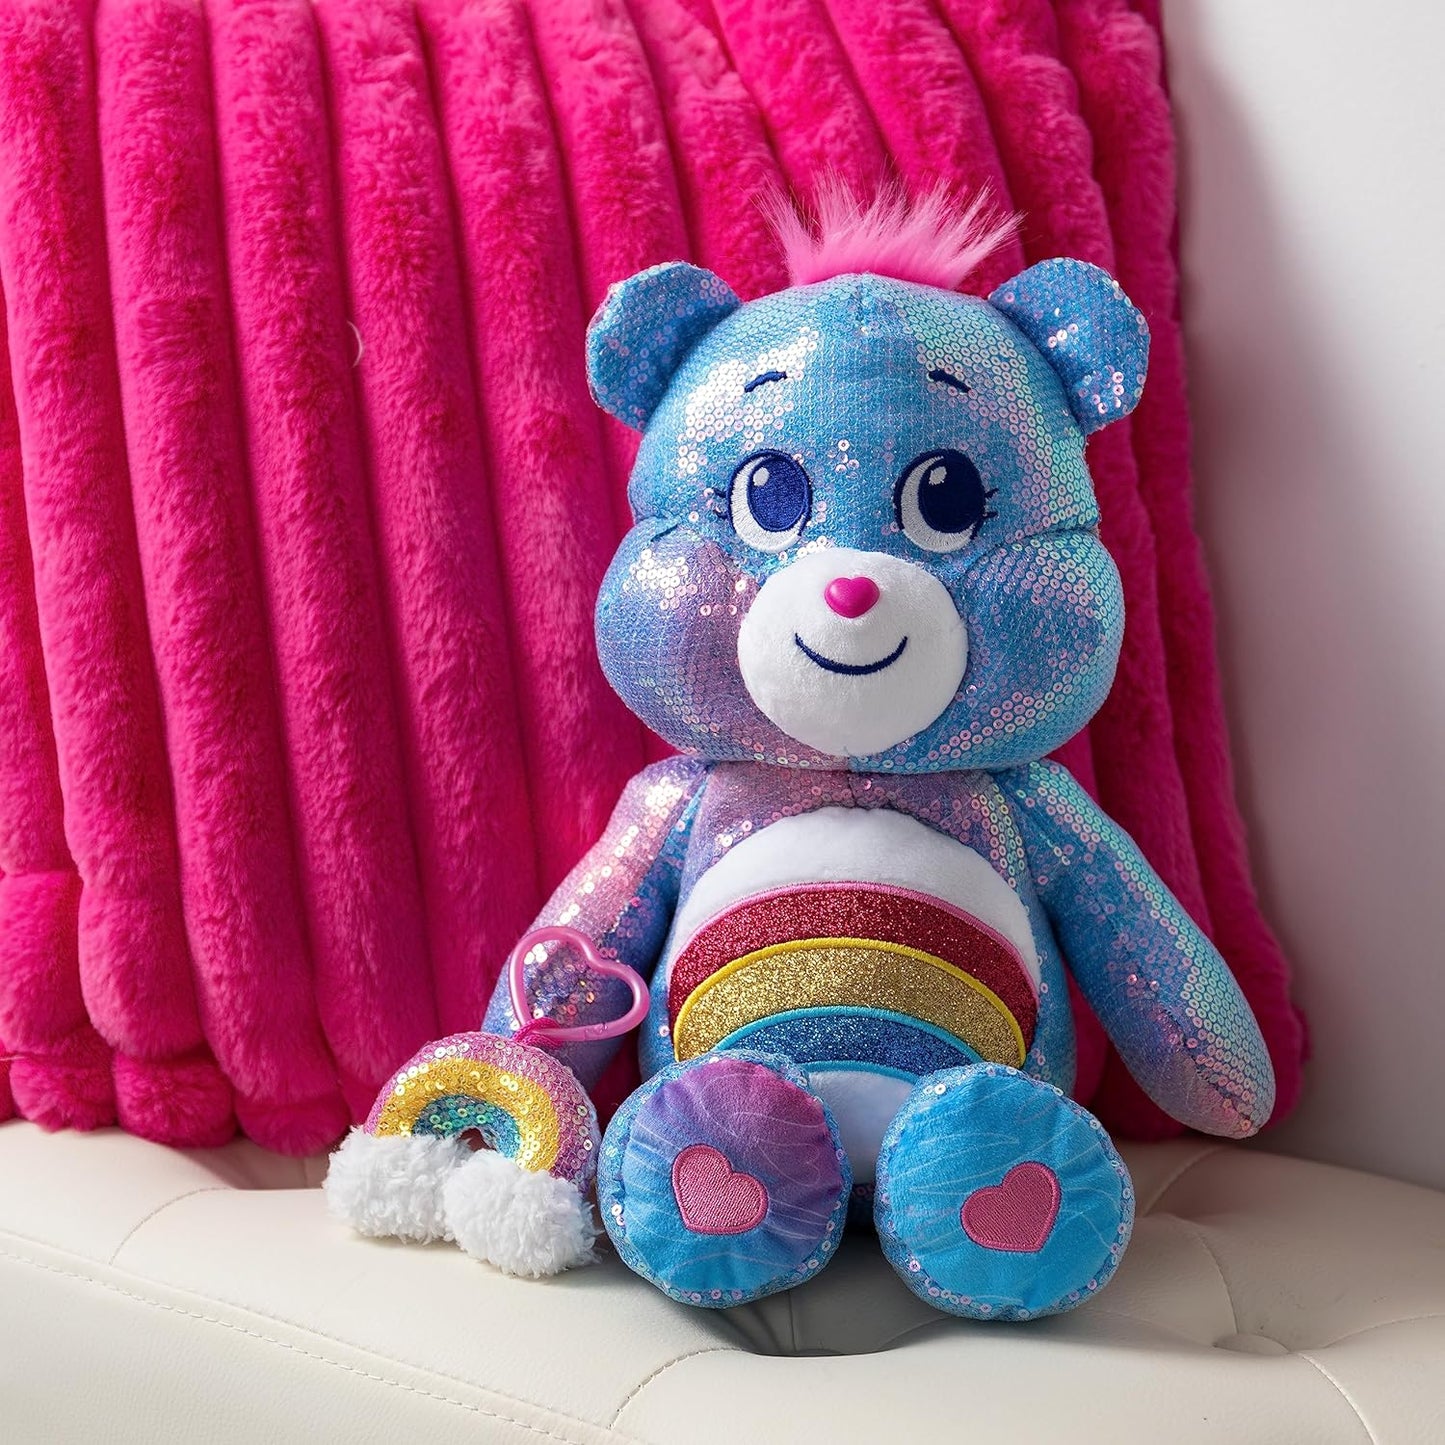 Care Bears Sequin Plush Cheer Bear Special Collector's Edition